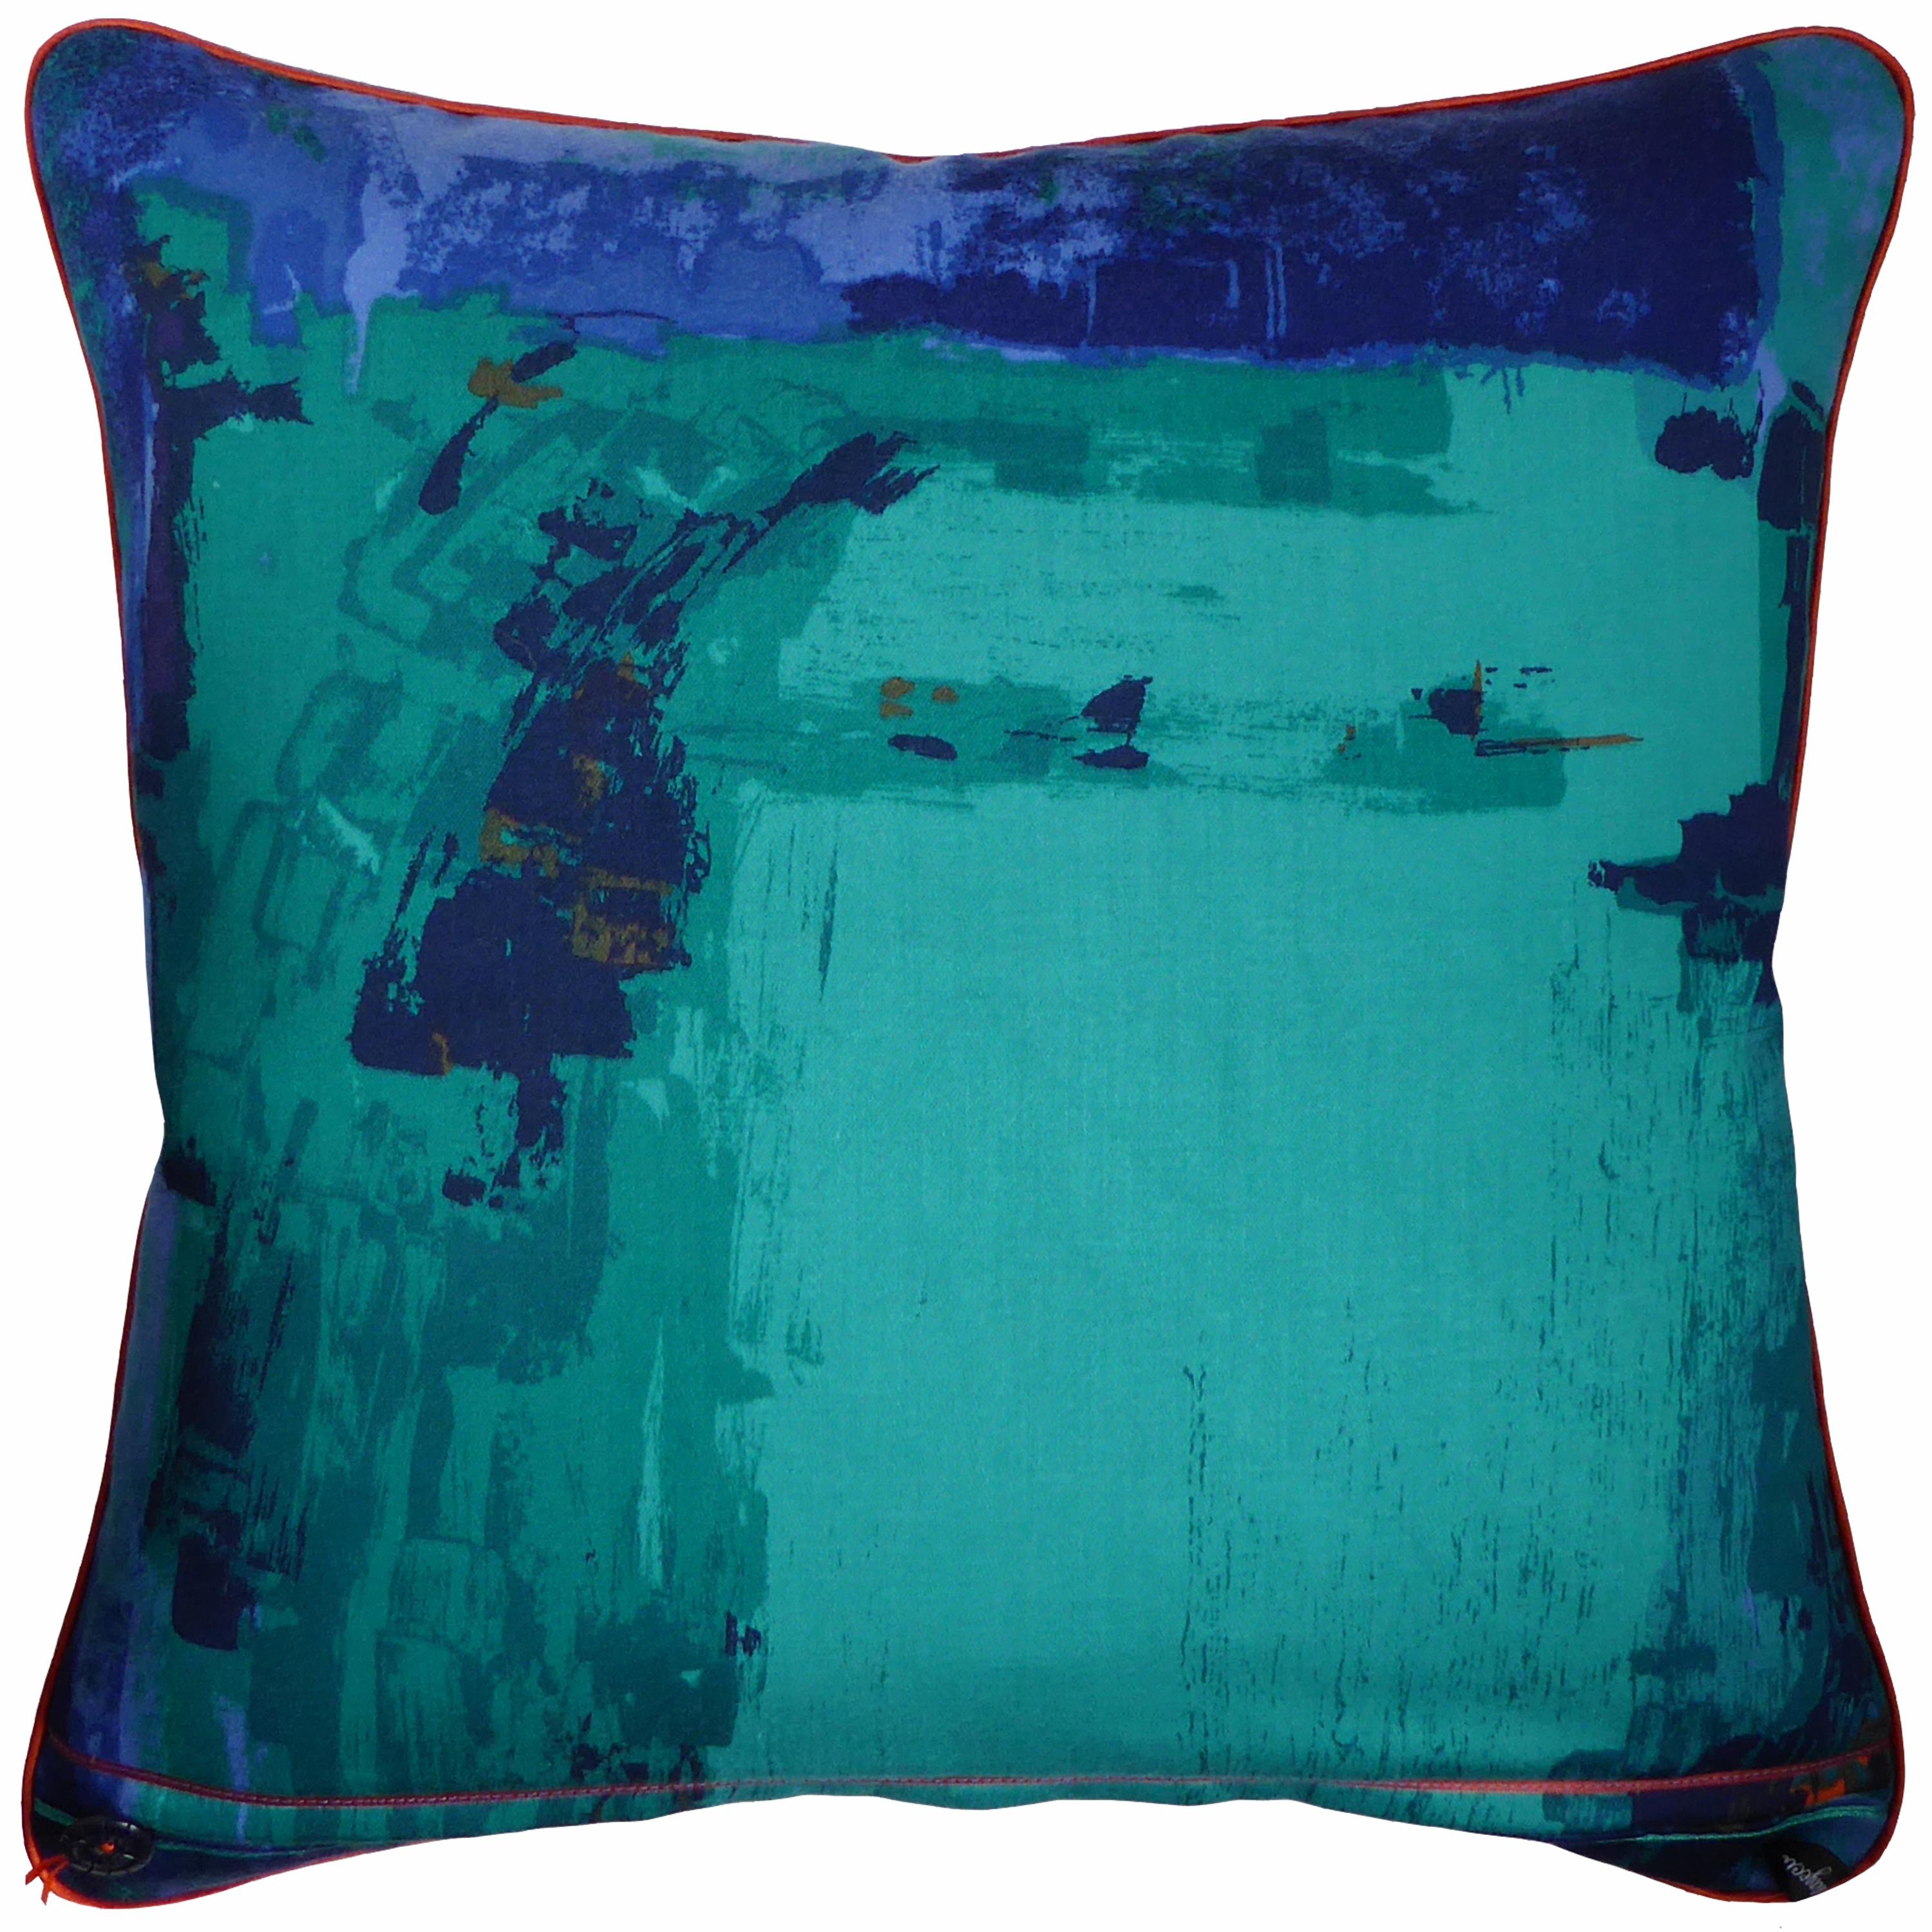 Romany
circa 1950
British bespoke made cushion created by using original vintage fabric designed by Francis Price in vibrant screen printed VAT colours
Provenance; Britain
Made by Nichollette Yardley-Moore
Vintage cushions
Cotton furnishing fabric